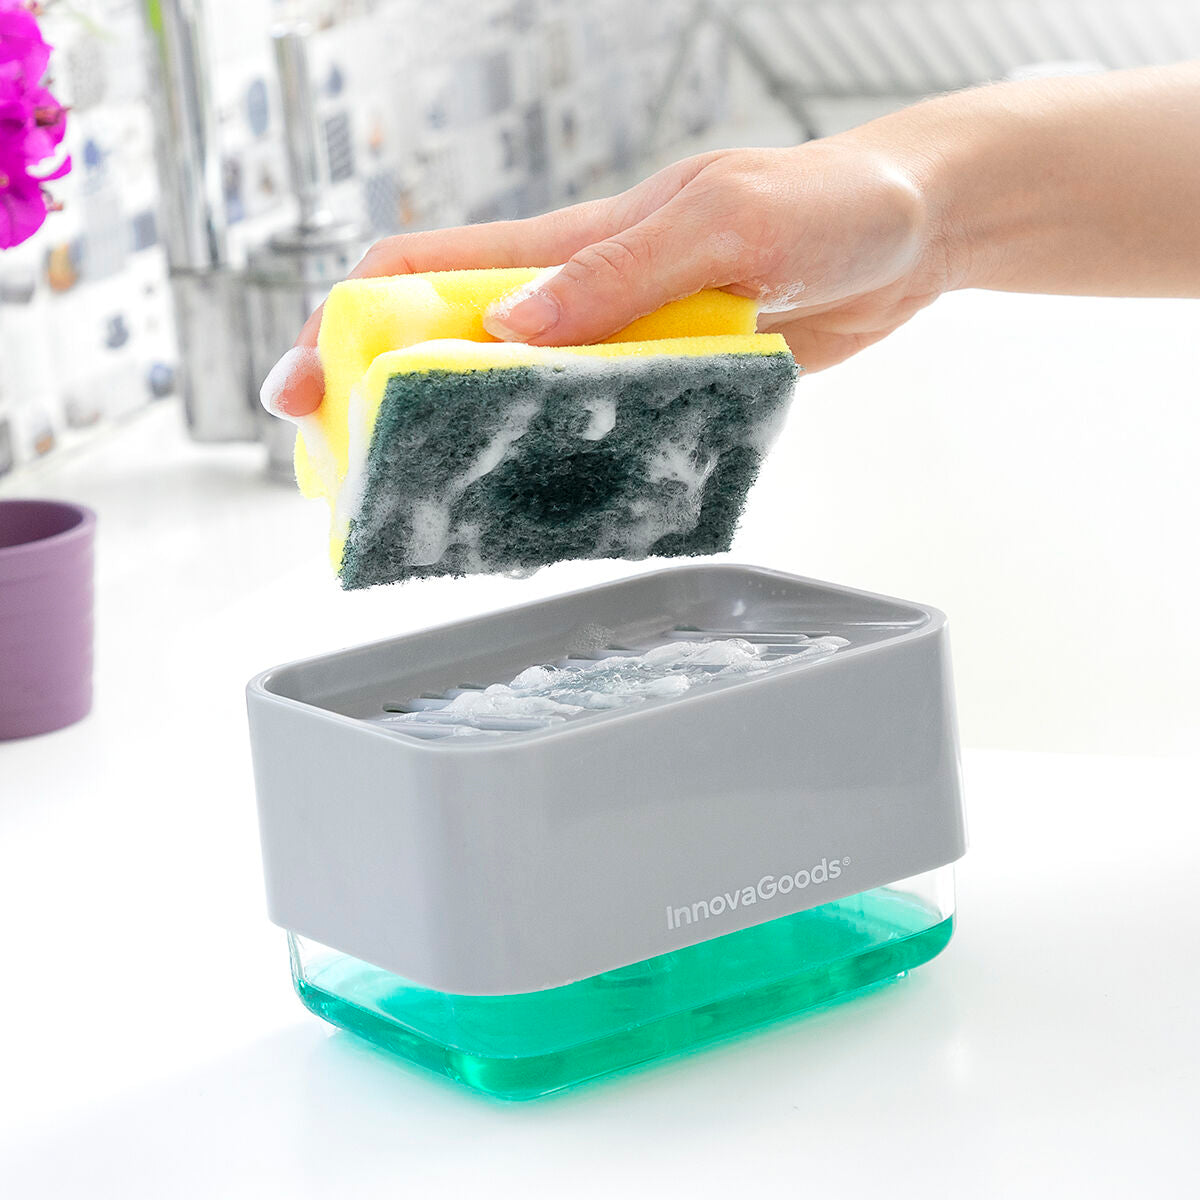 2-in-1 soap dispenser for the kitchen